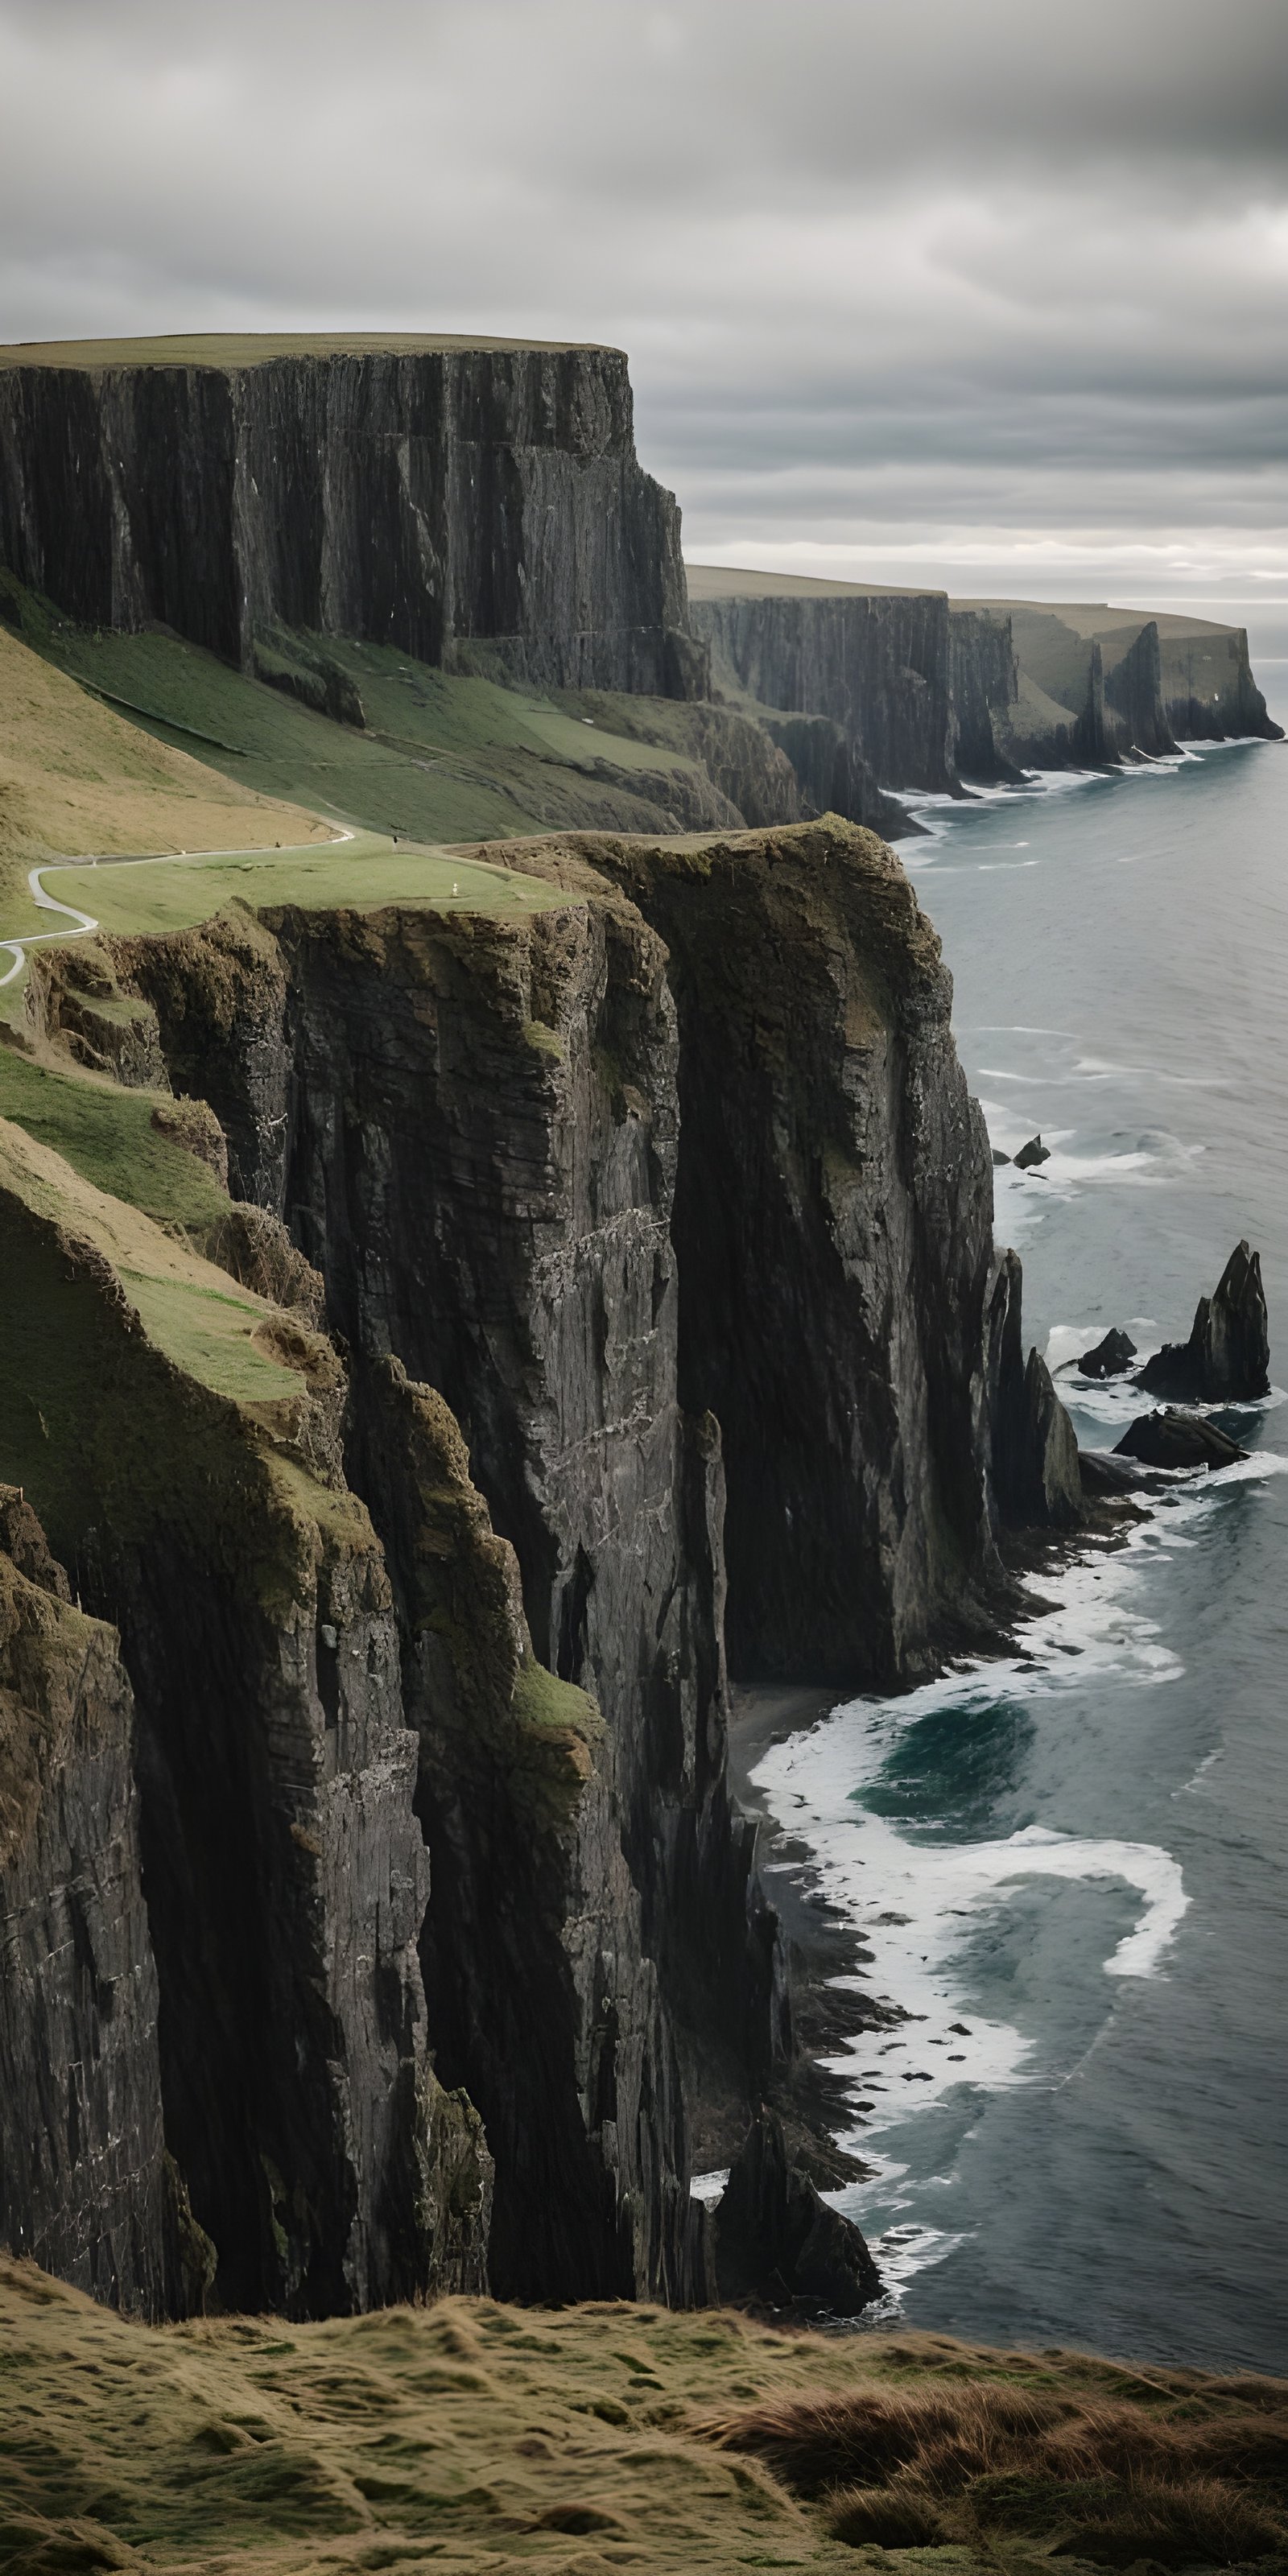 Towering cliffs along the coast of Ireland, World Places, Landscape